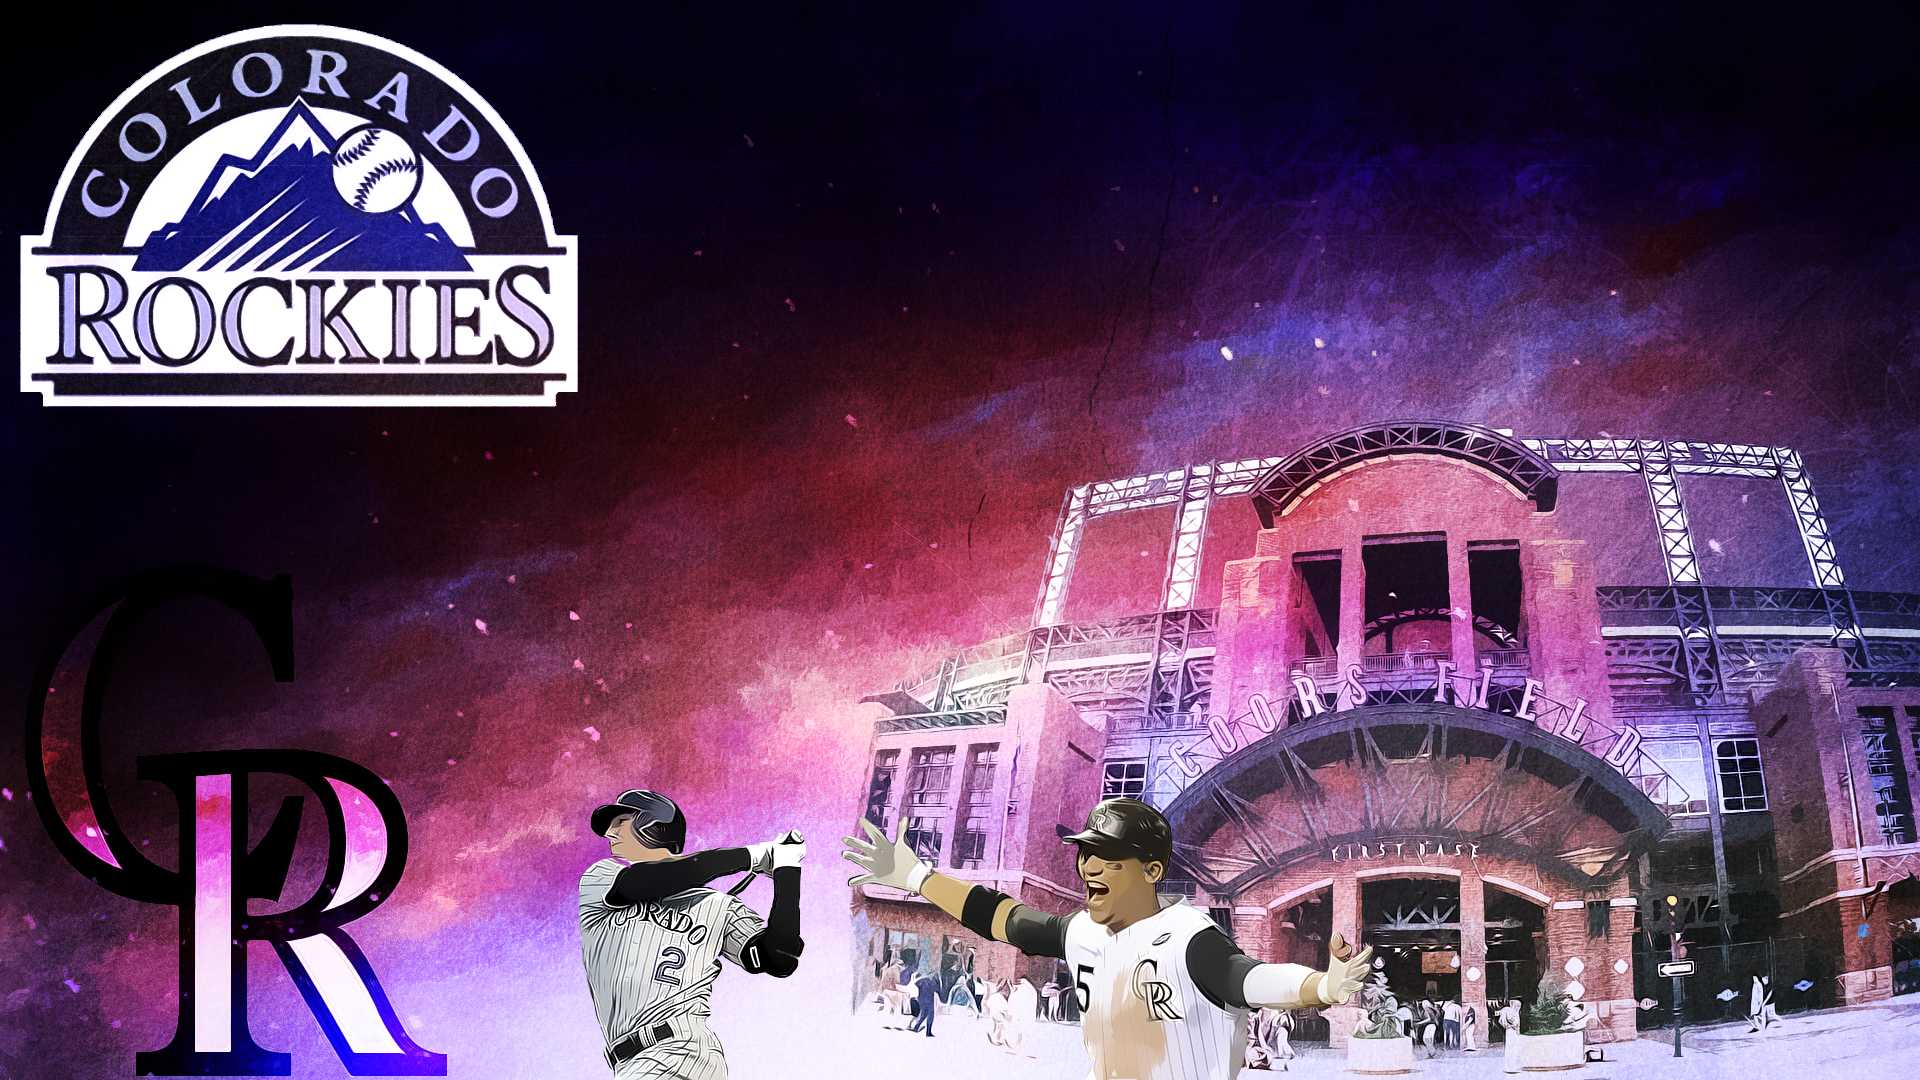 Colorado Rockies Wallpaper High Quality For Computer By Freyaka On